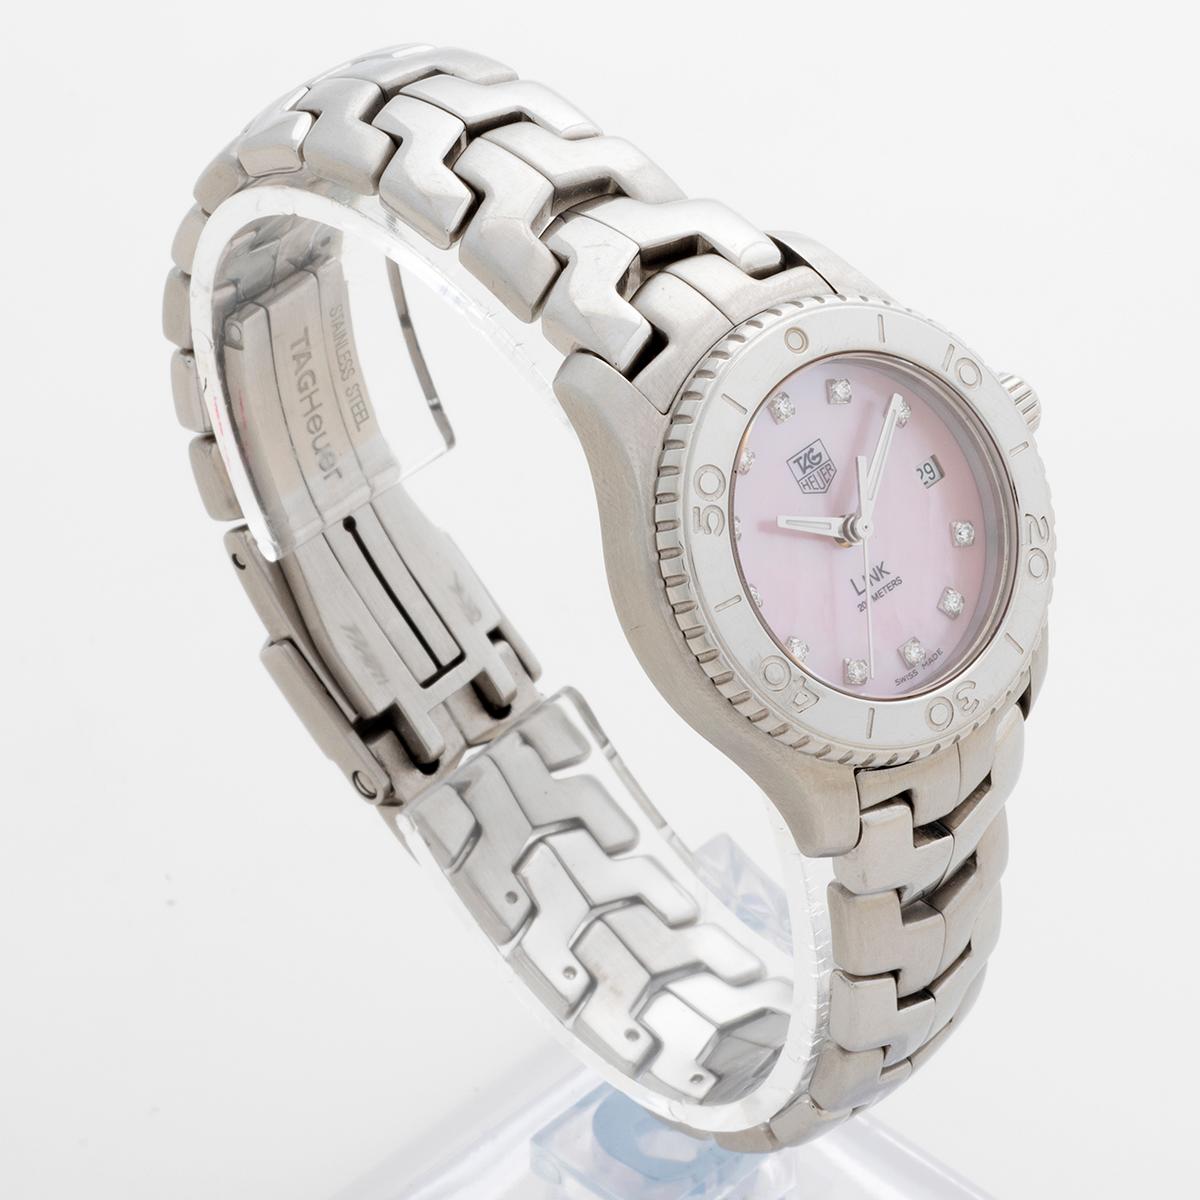 Our very attractive ladies Tag Heuer Link quartz date , reference WJ131-C1, features a 28mm stainless steel case with polished rotating bezel, factory pink mother of pearl dial set with eleven fine quality diamonds, and stainless steel bracelet,